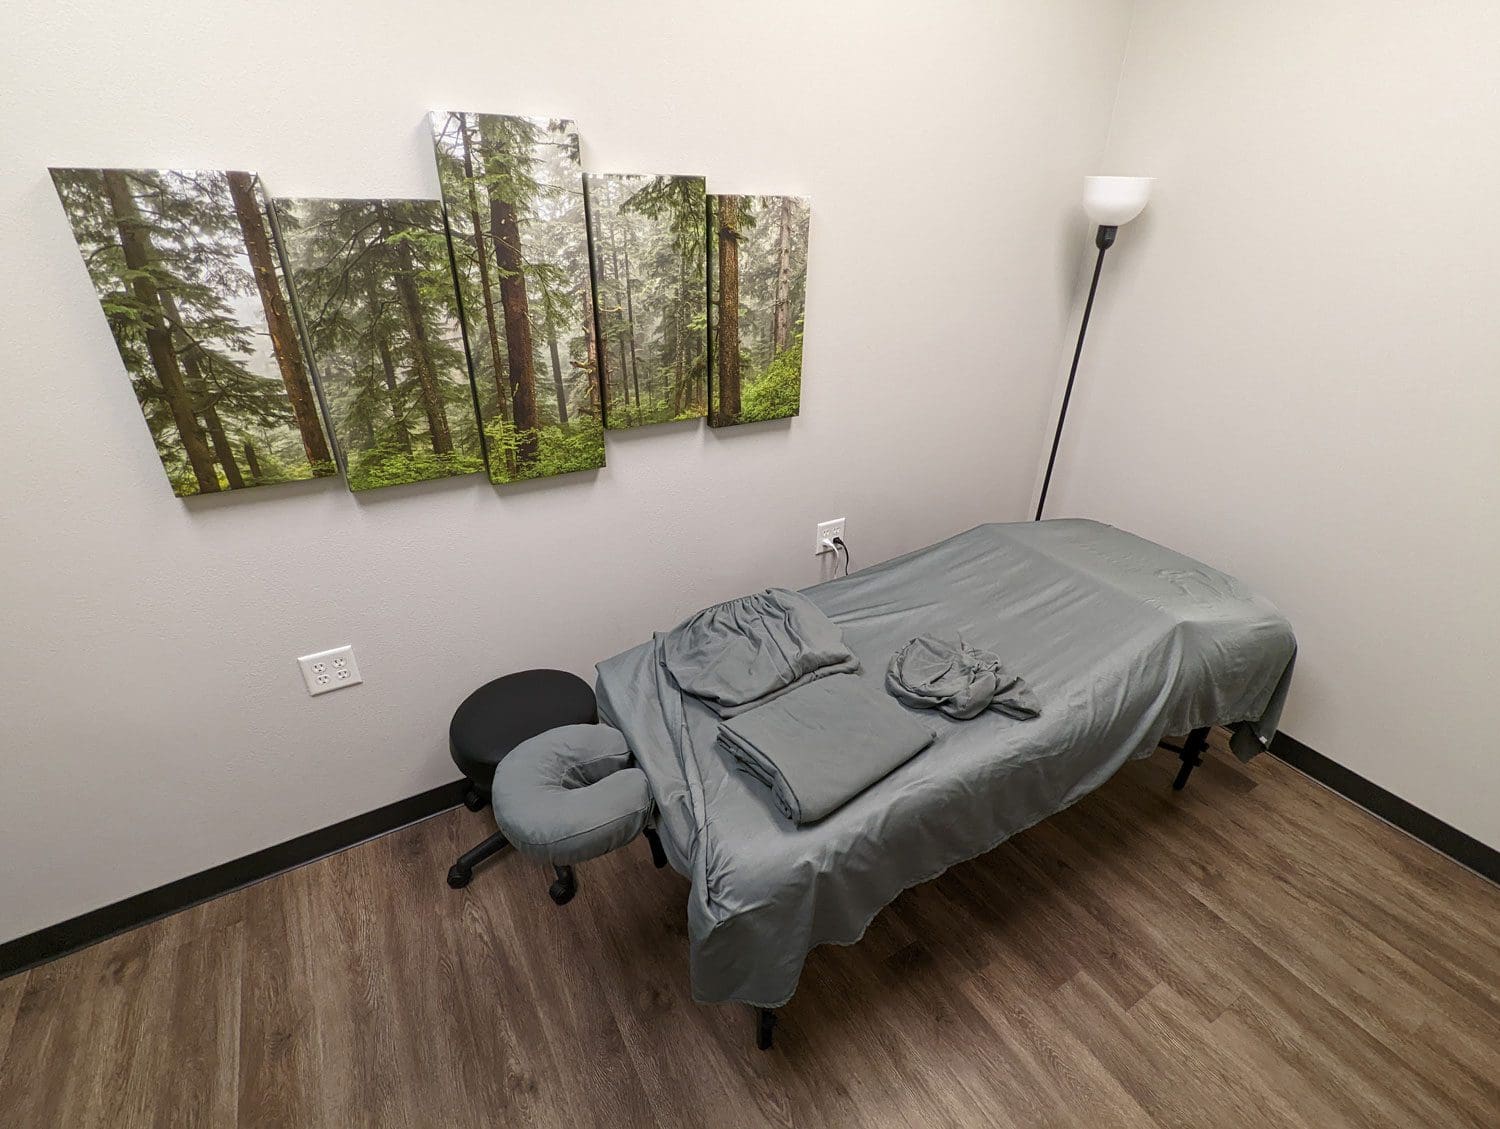 South Salem massage therapy room. The room has wood floors, and contains a massage table and wooded forest artwork.